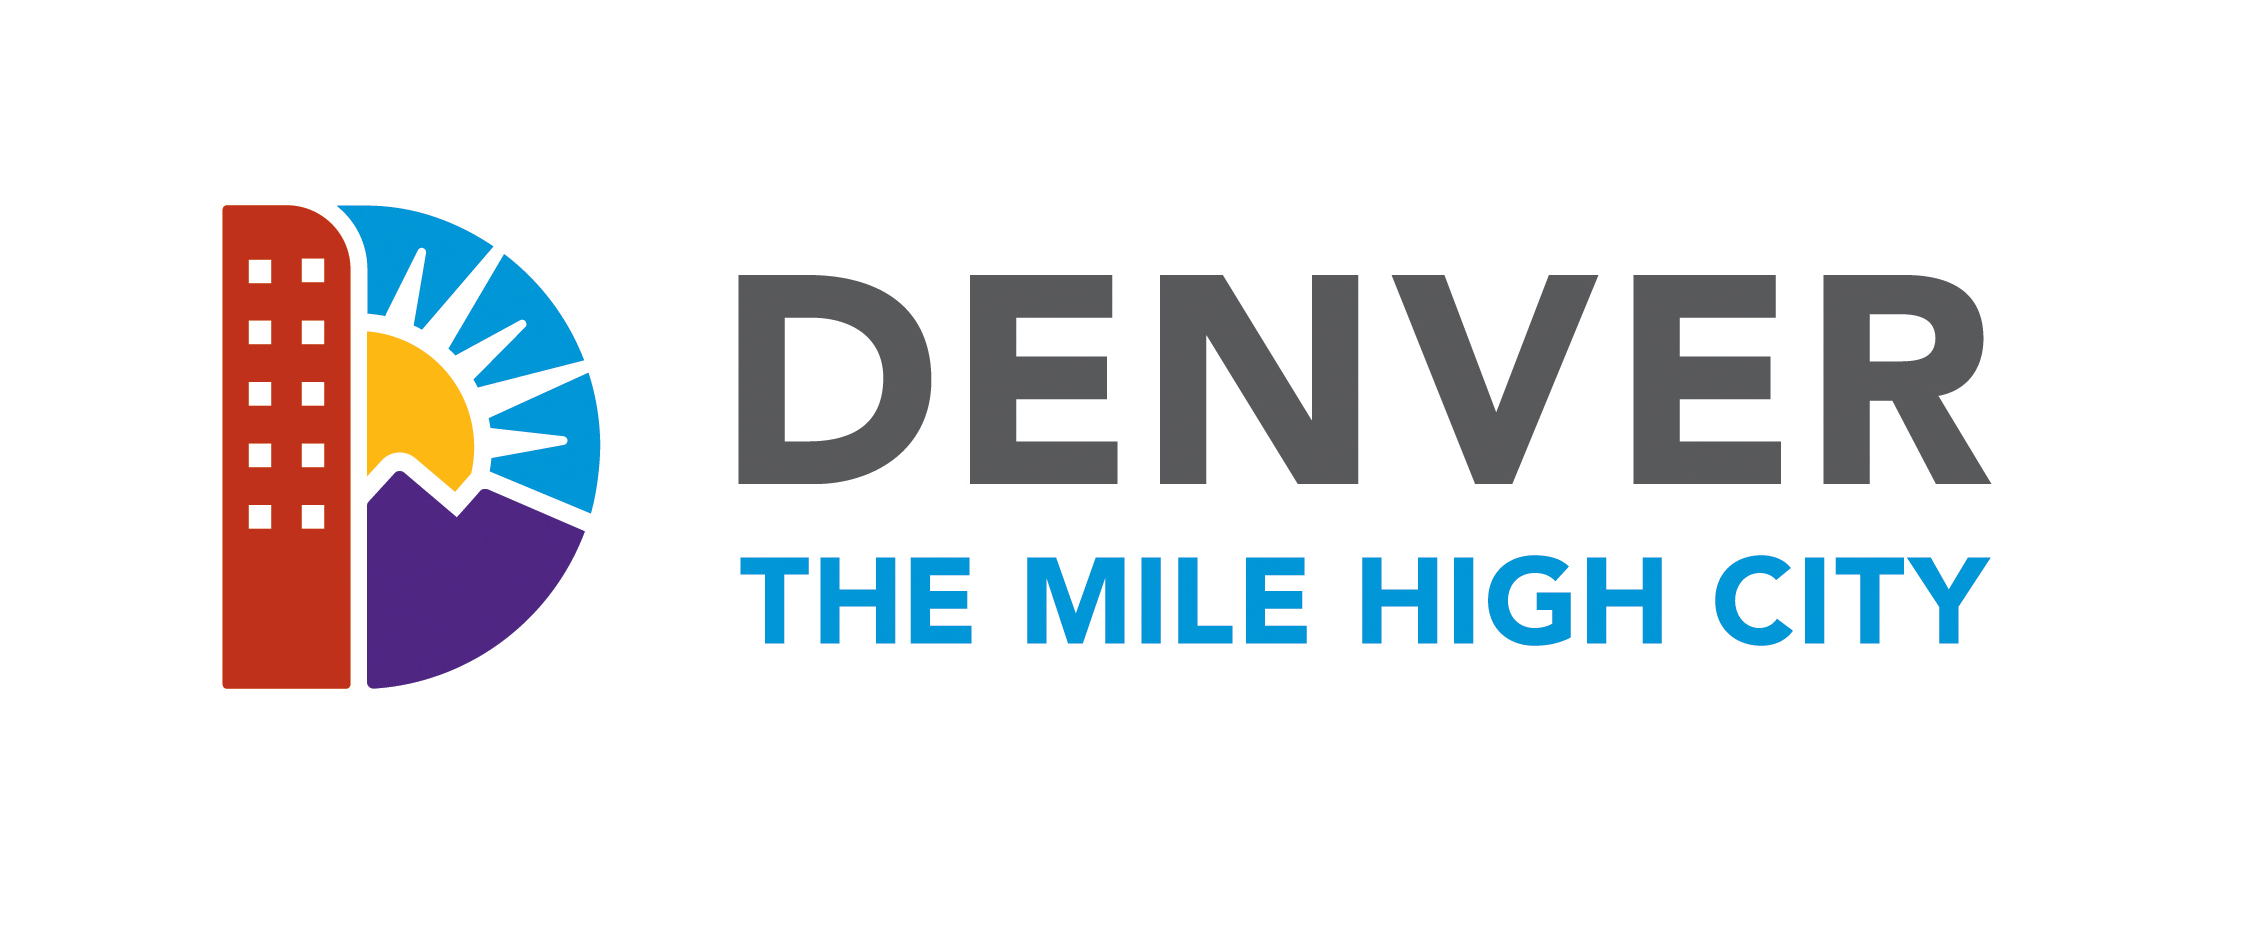 Organization logo of City and County of Denver Department of Transportation and Infrastructure